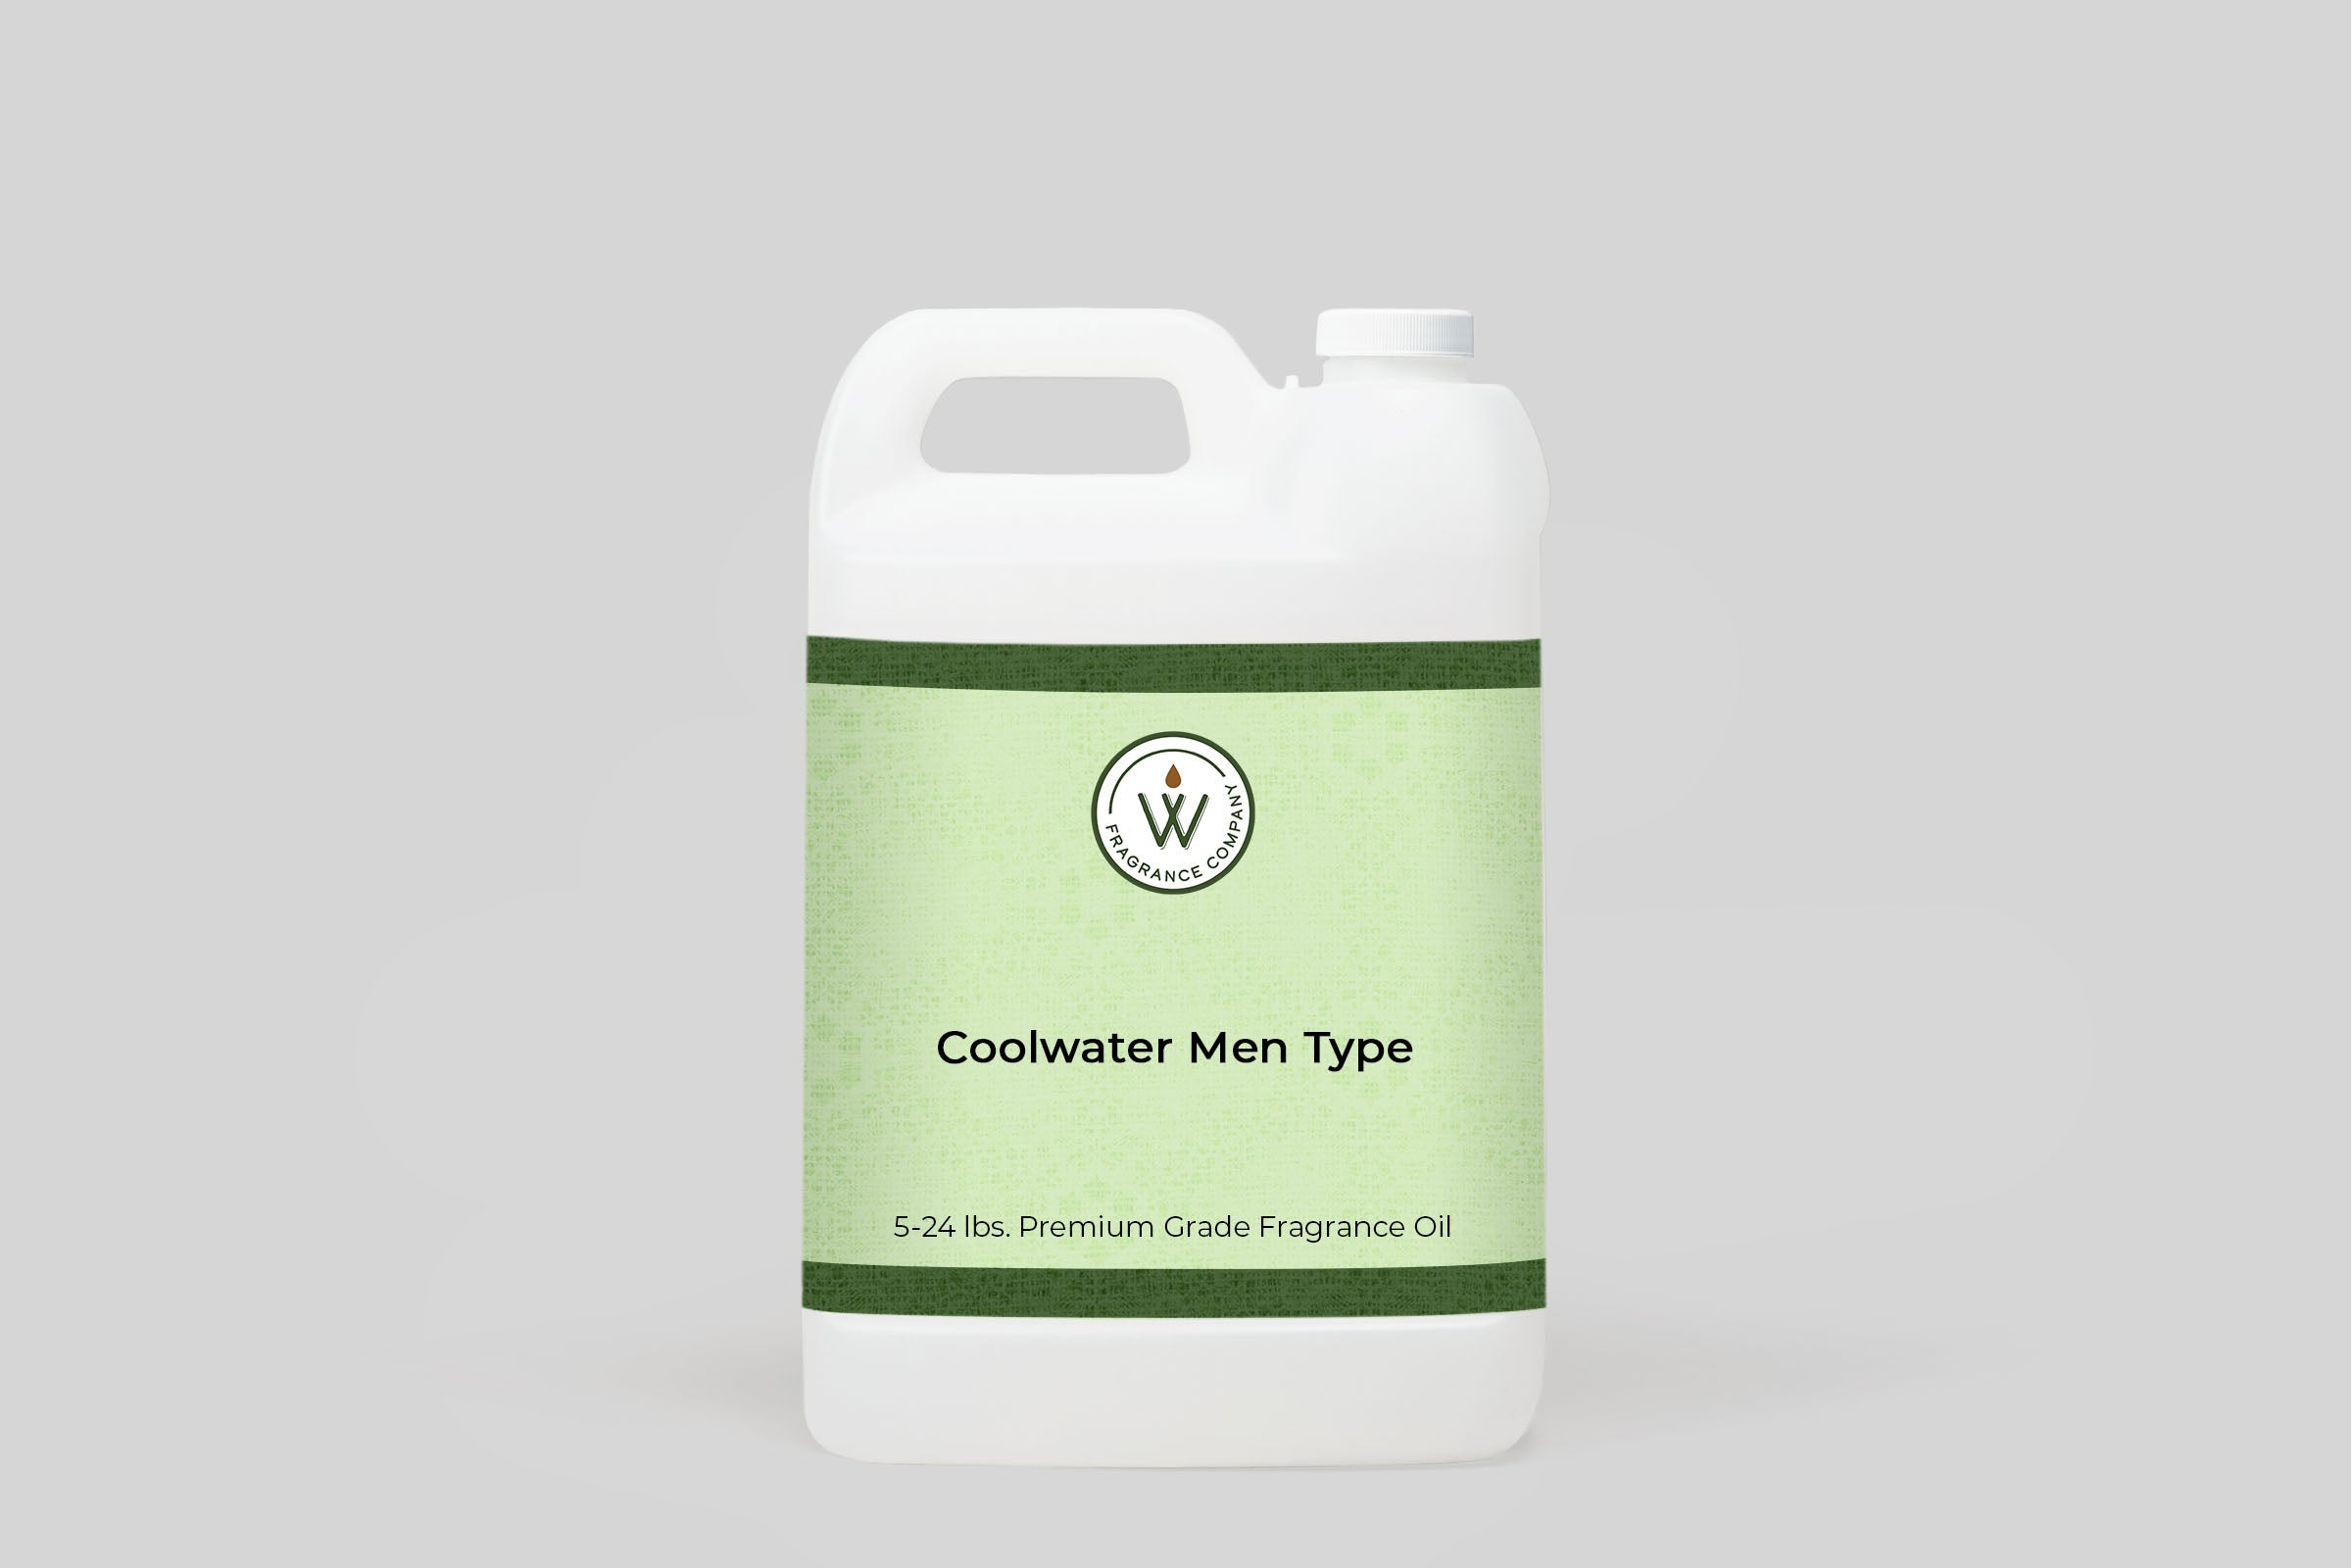 Coolwater Men Type Fragrance Oil